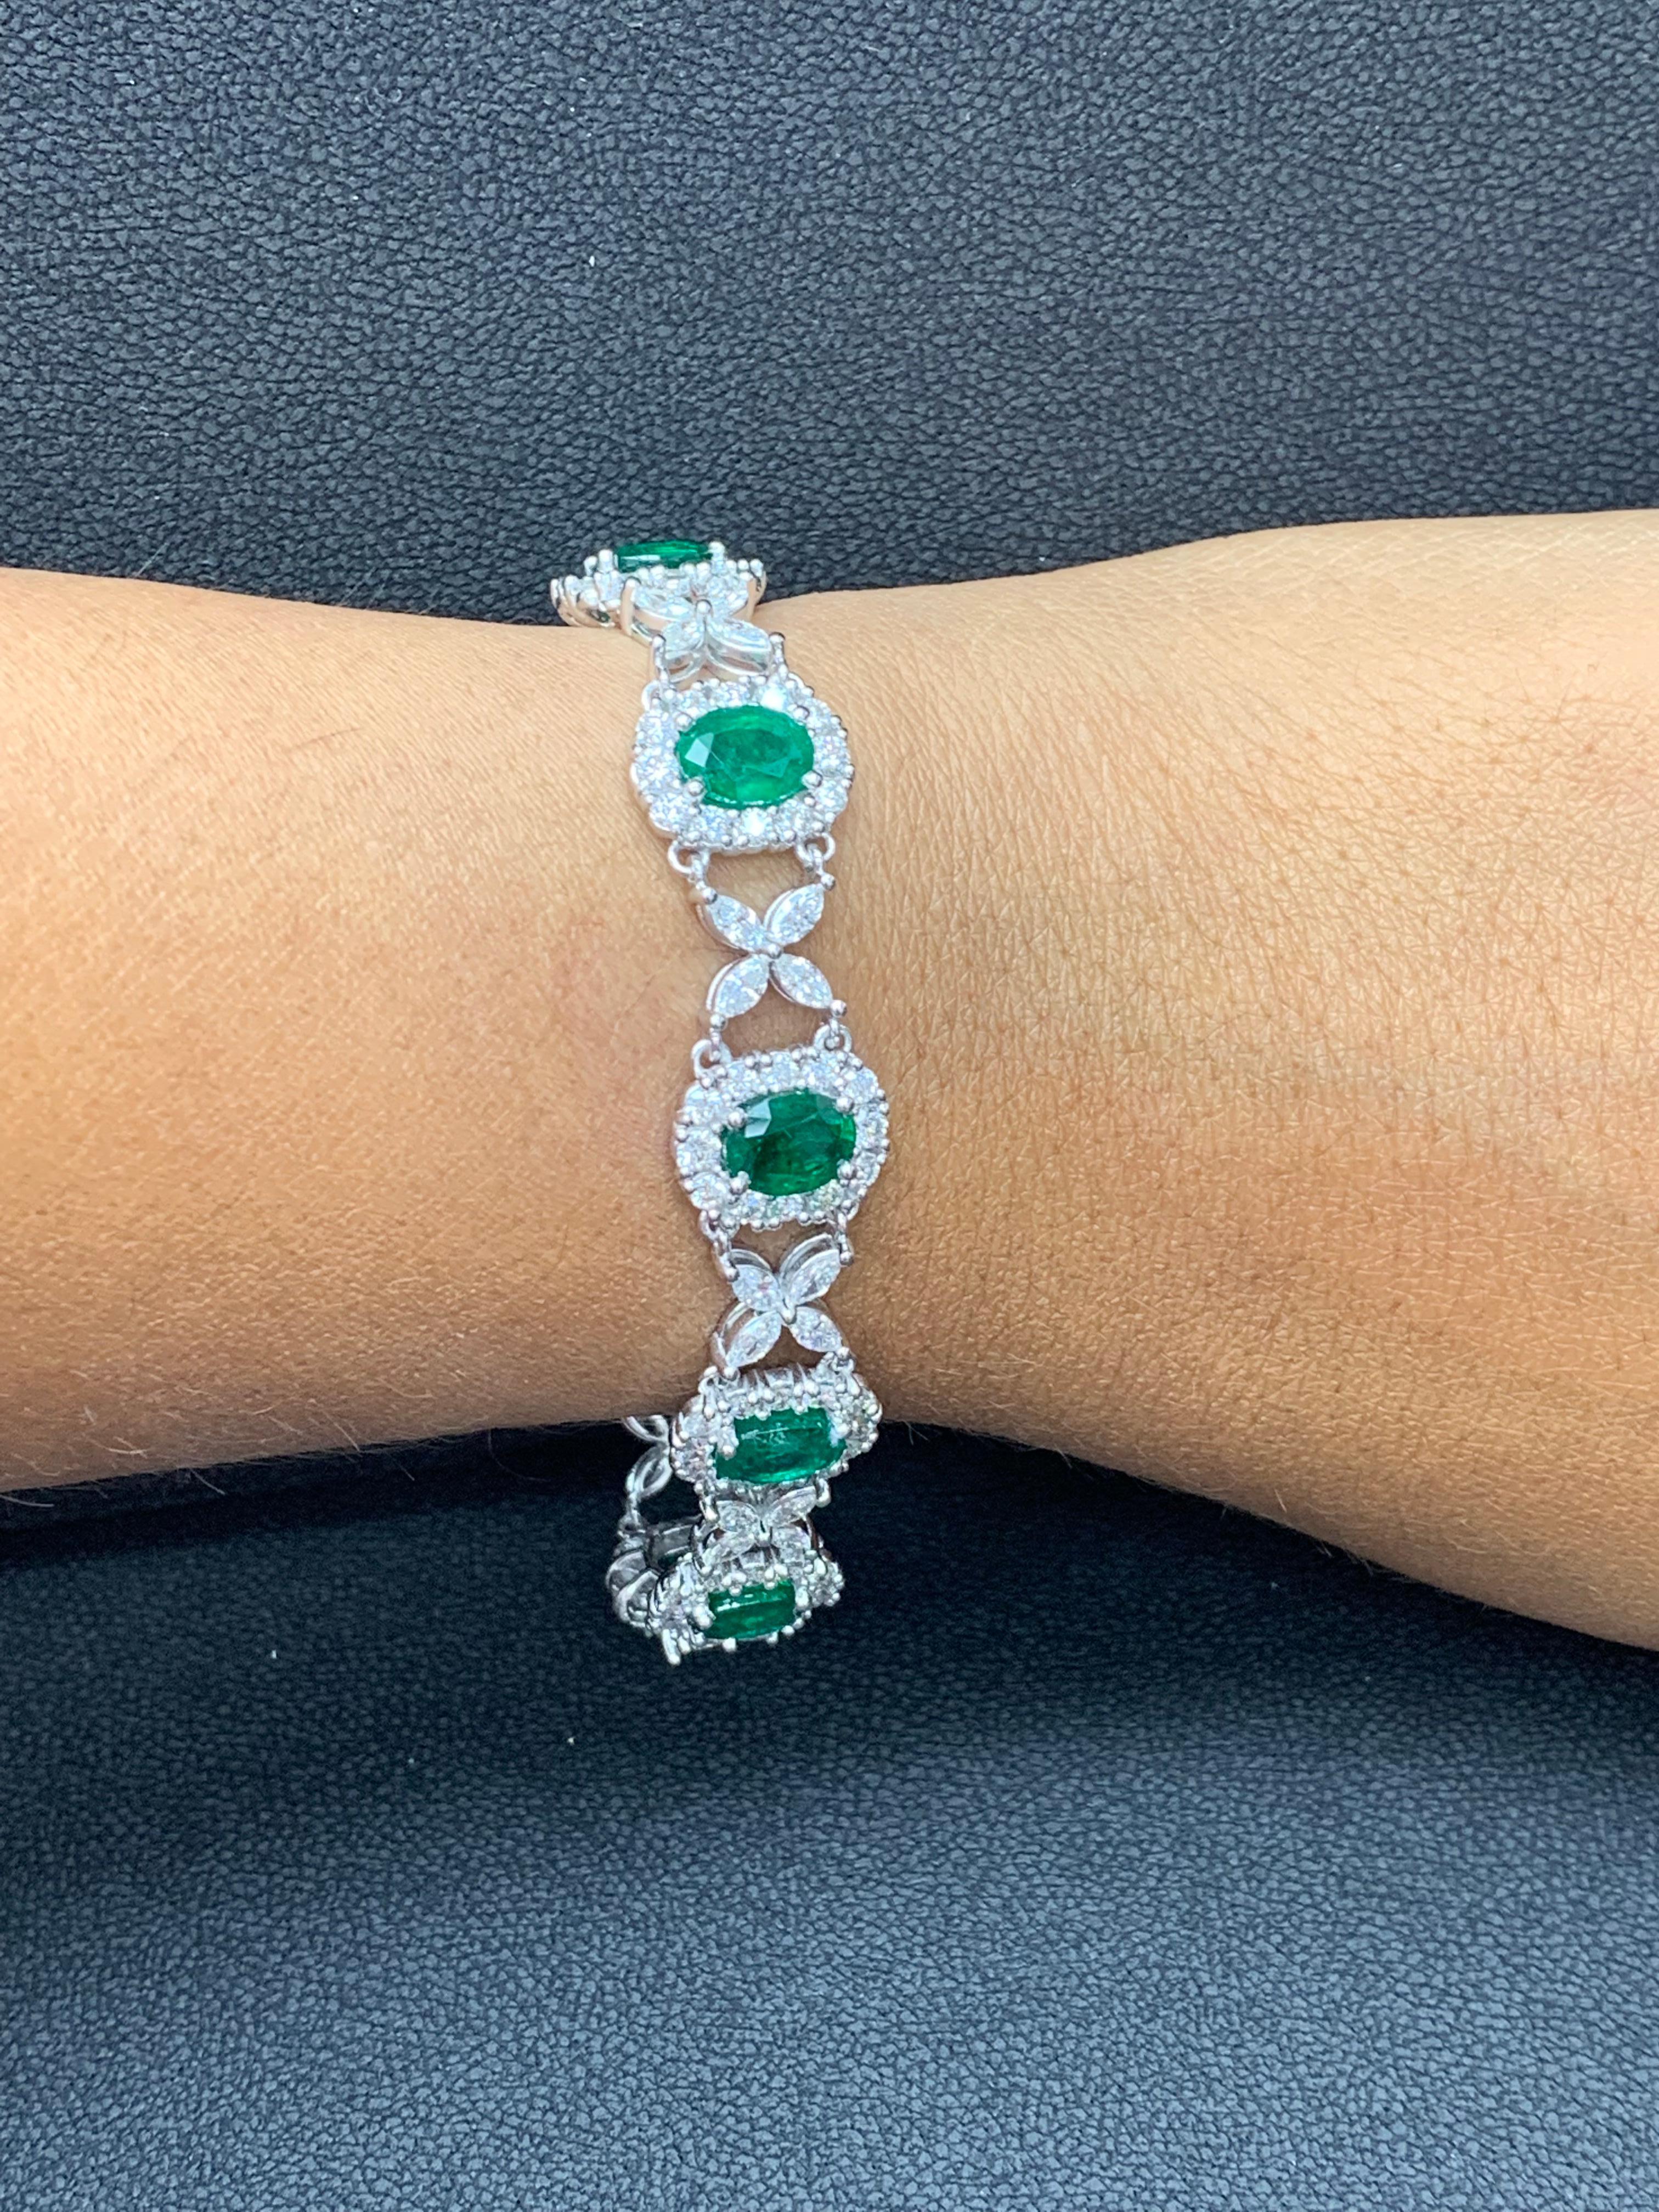 10.52 Carat Oval Cut Emerald and Diamond Tennis Bracelet in 14K White Gold For Sale 6